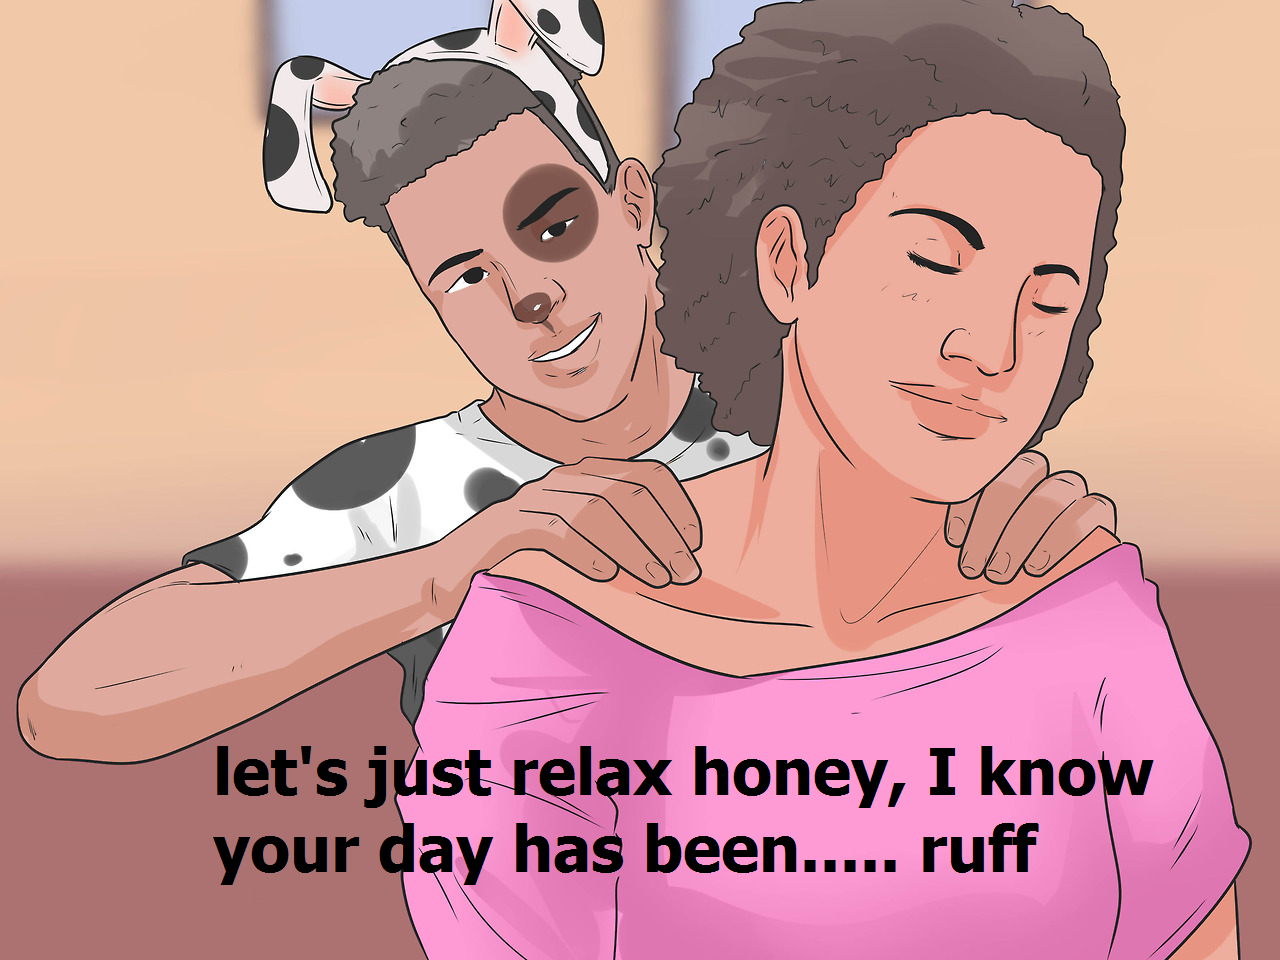 disturbing wikihow - M let's just relax honey, I know your day has been..... ruff